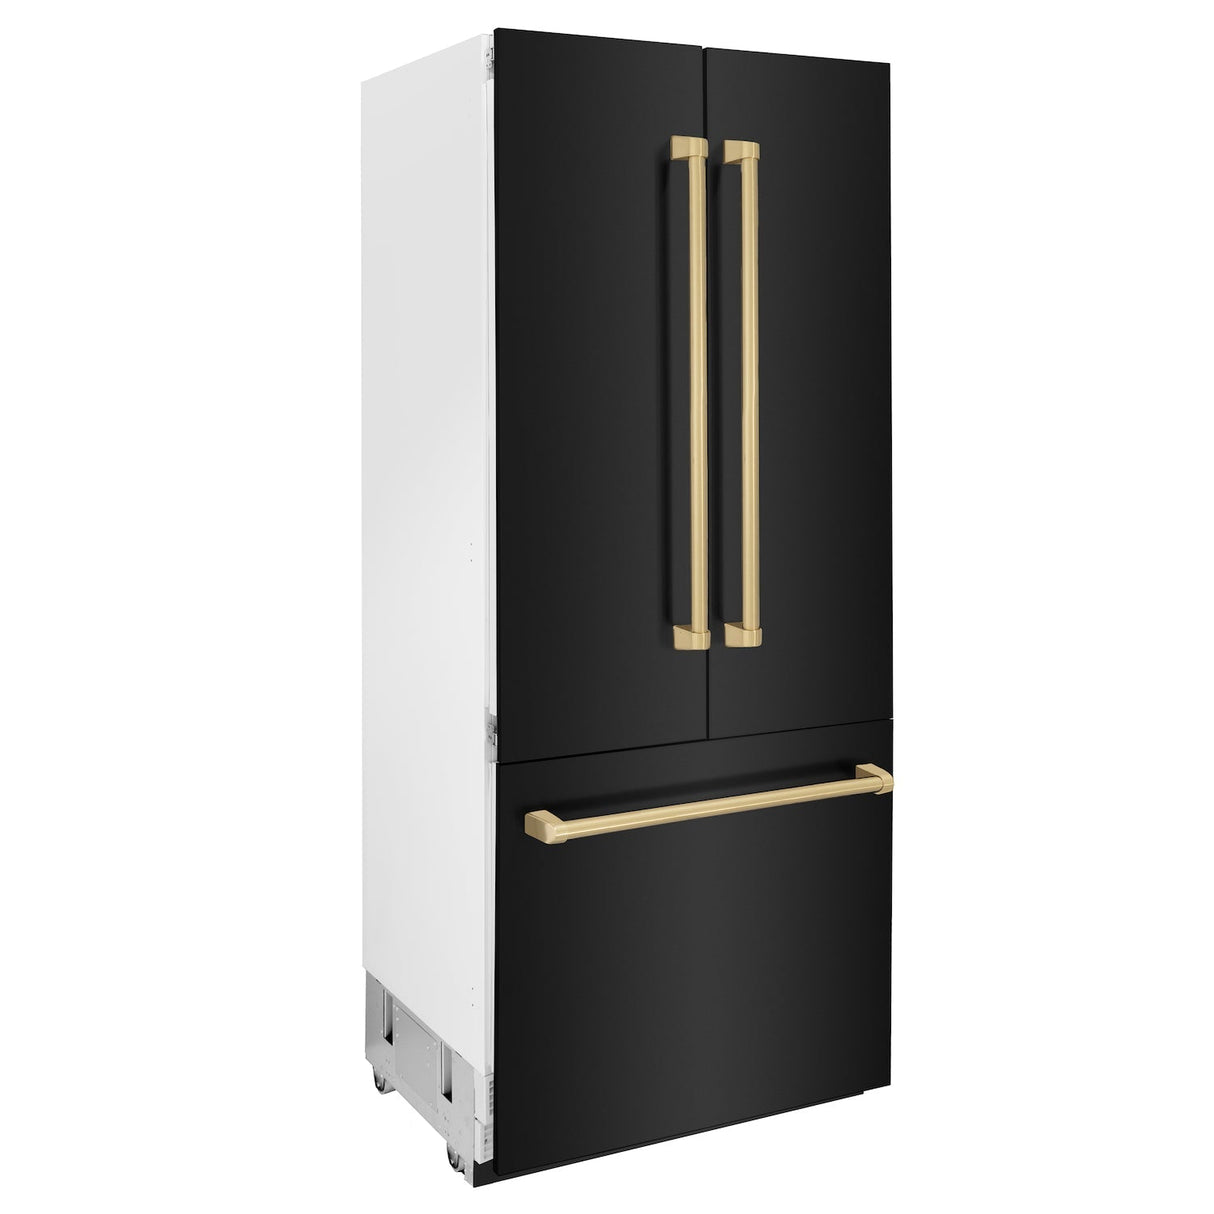 ZLINE Autograph Edition 36 in. 19.6 cu. ft. Built-in 3-Door French Door Refrigerator with Internal Water and Ice Dispenser in Black Stainless Steel with Champagne Bronze Accents (RBIVZ-BS-36-CB)